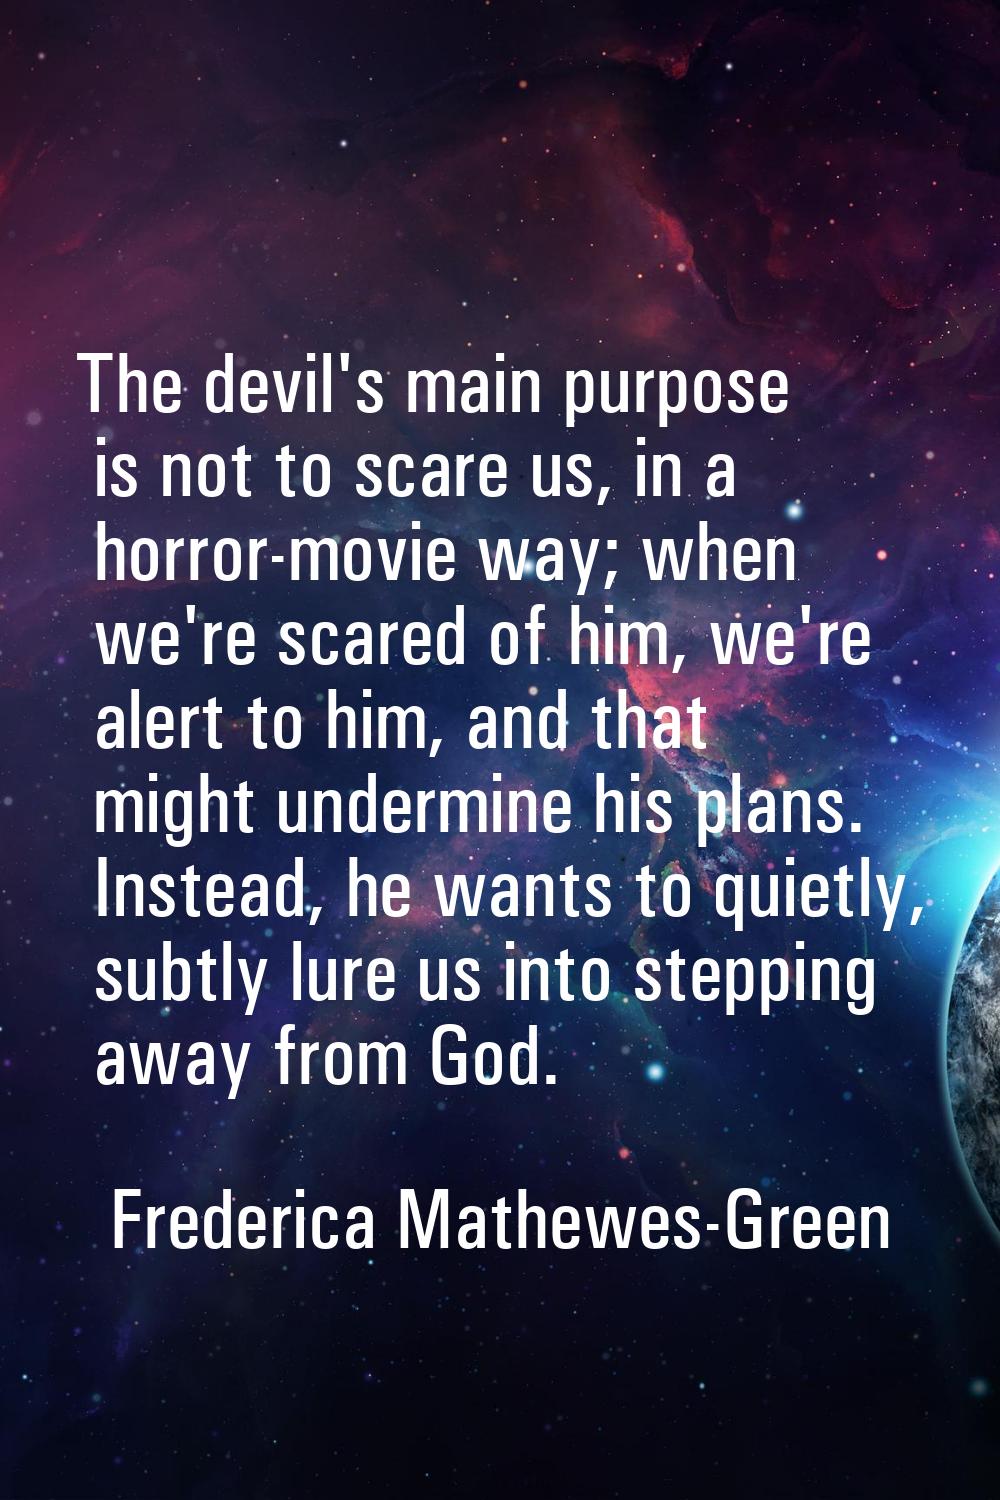 The devil's main purpose is not to scare us, in a horror-movie way; when we're scared of him, we're